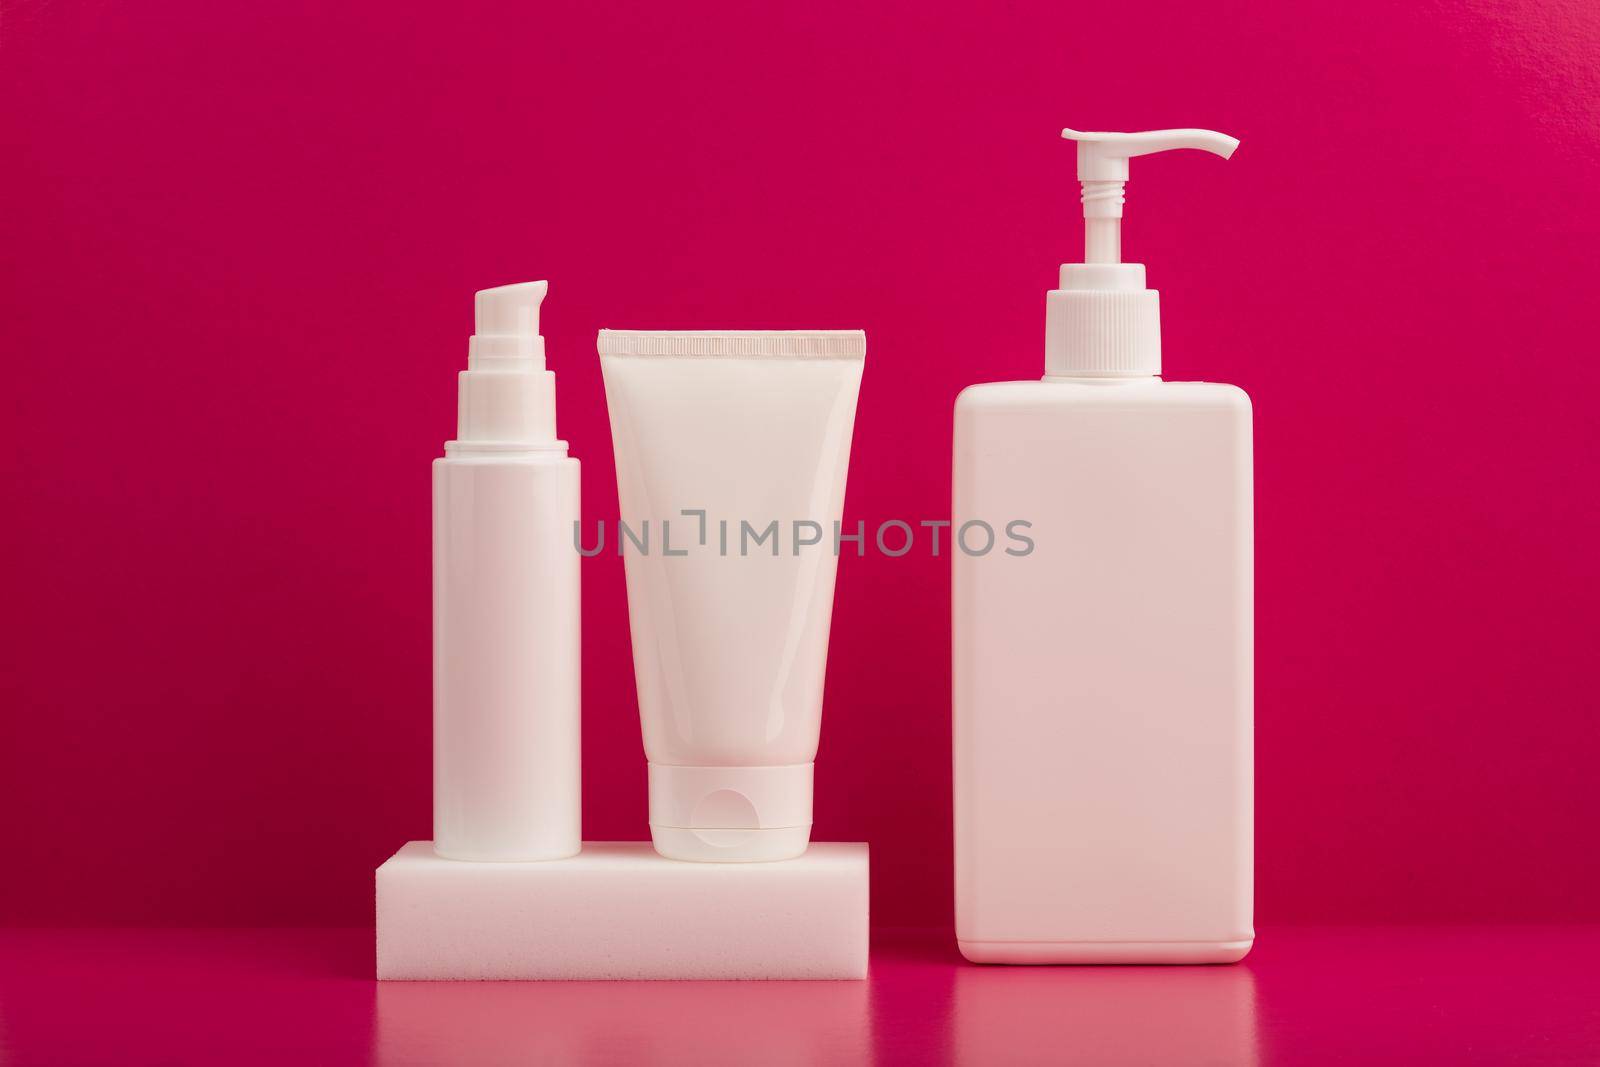 Set of creams or lotions on white podium against pink background on pink table. Concept of beauty treatment by Senorina_Irina